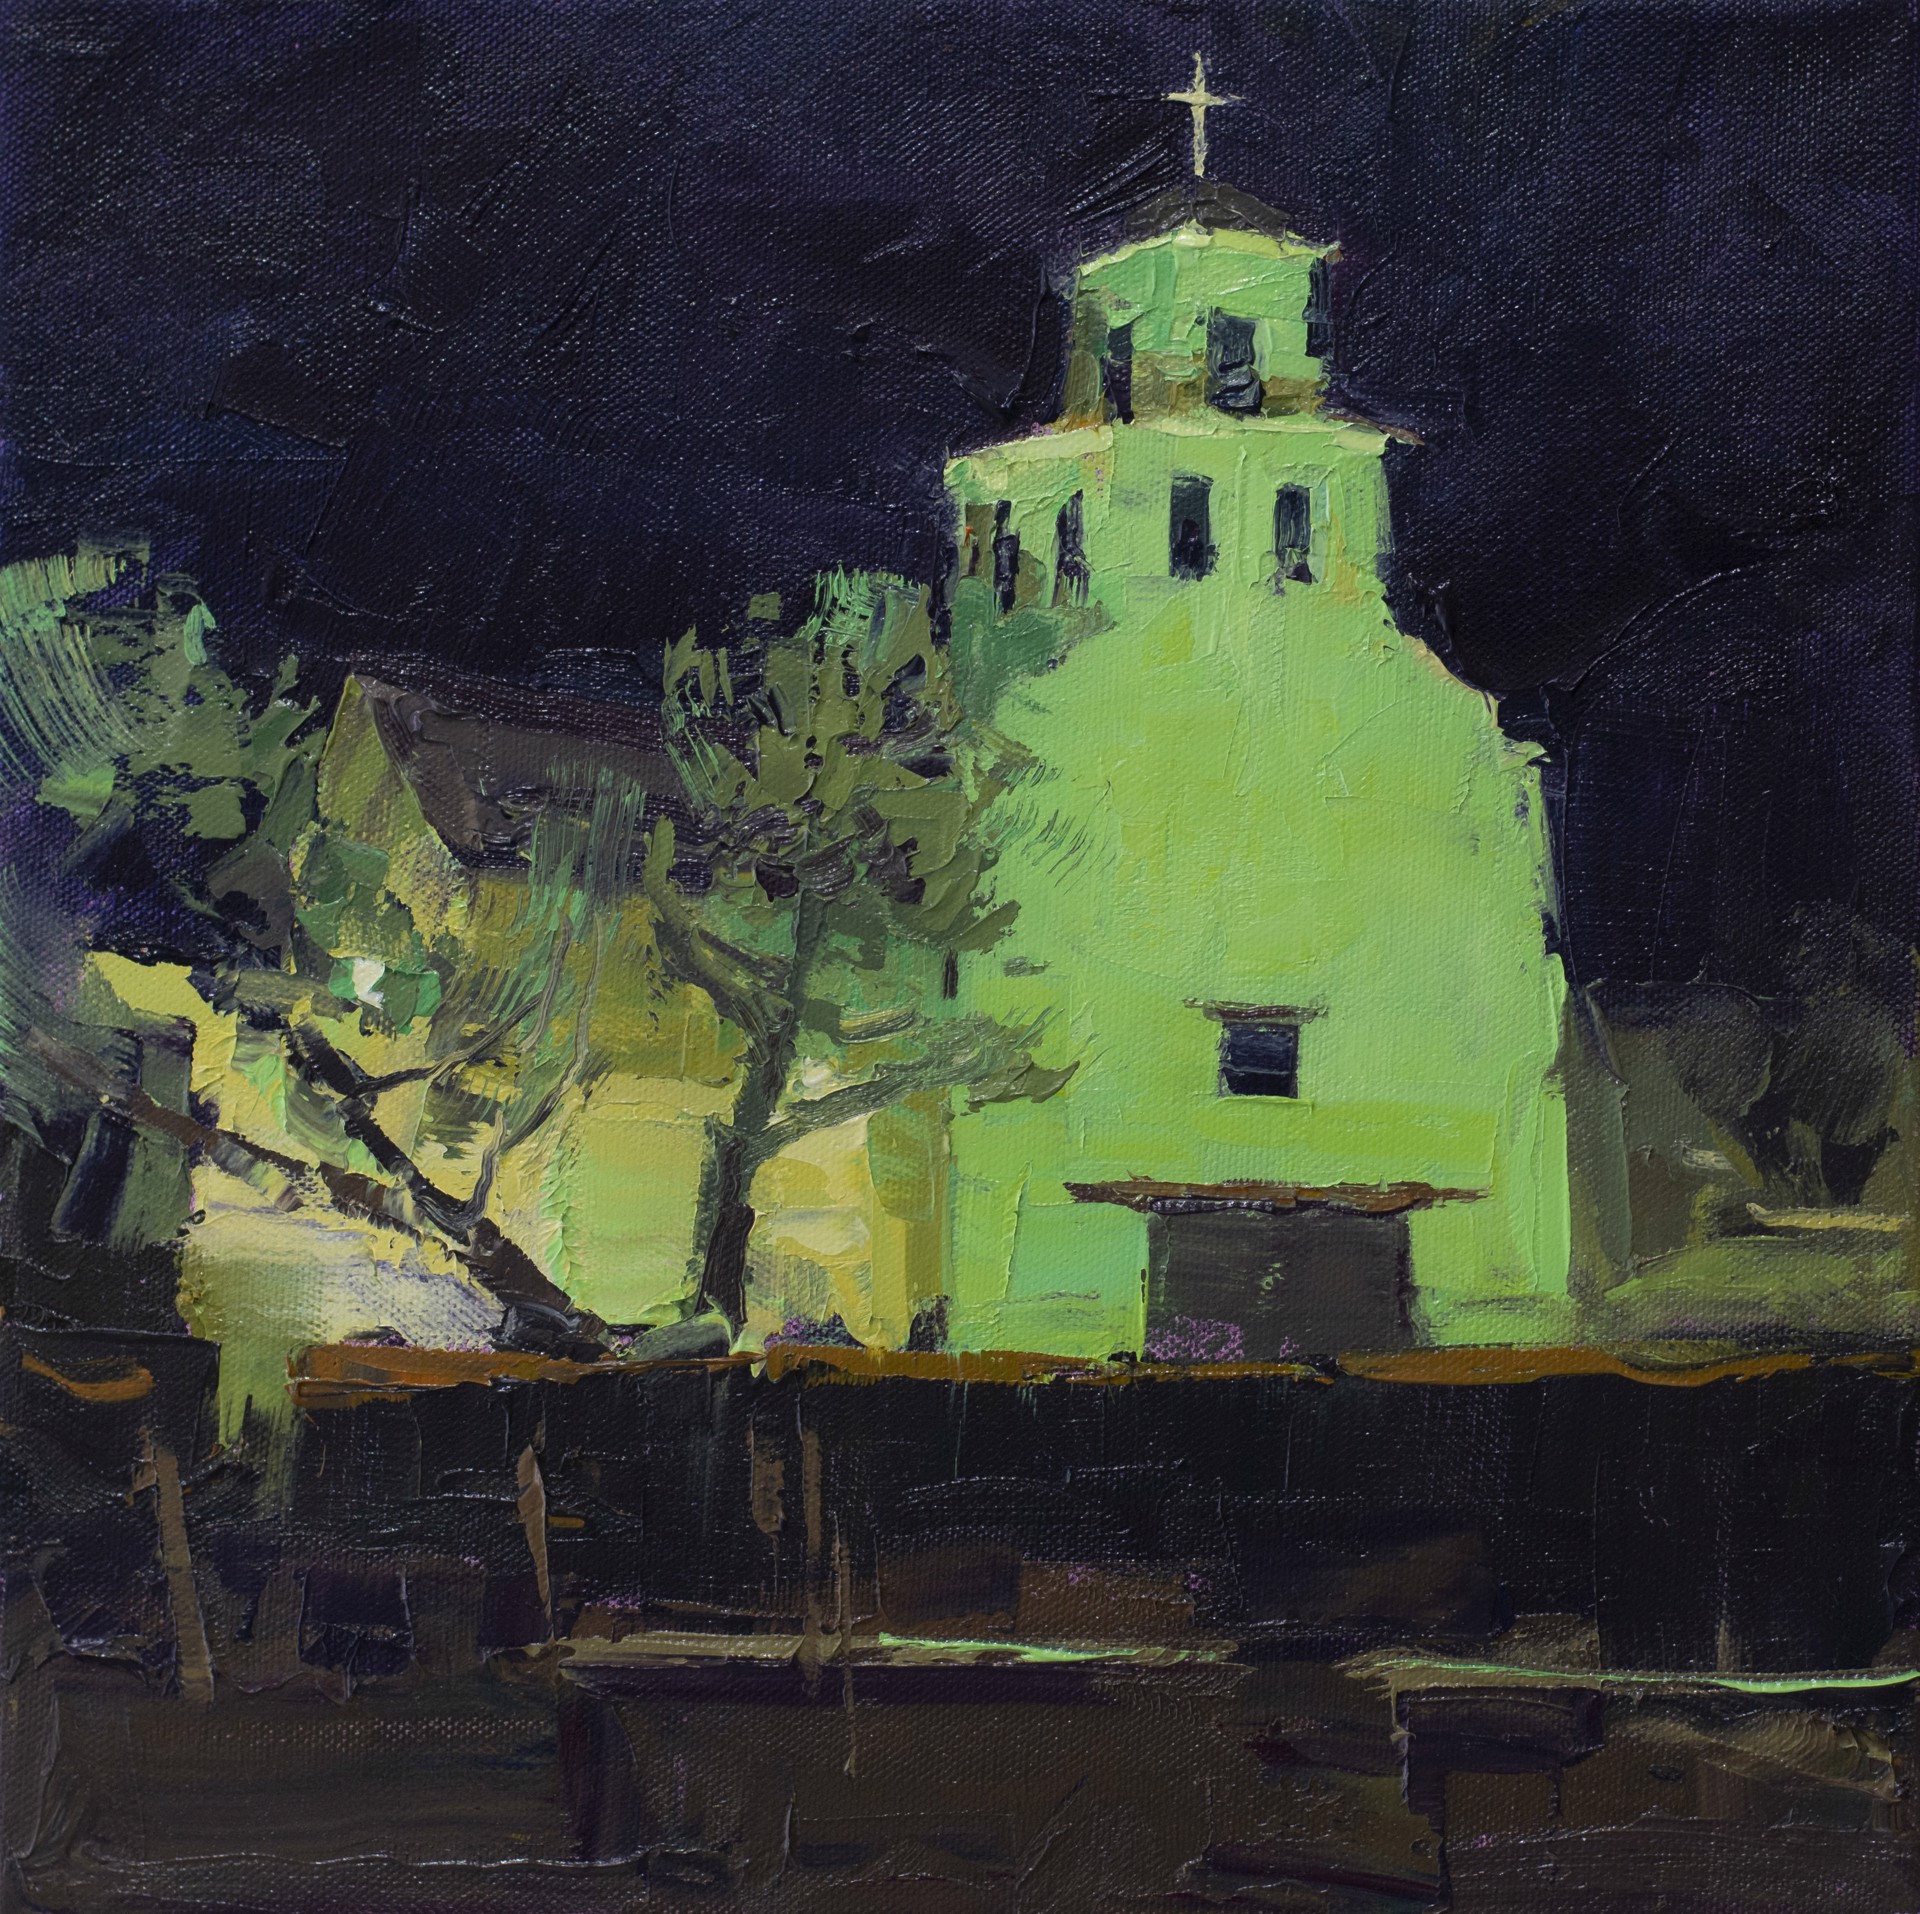 Nocturn in Santa Fe by Silas Thompson